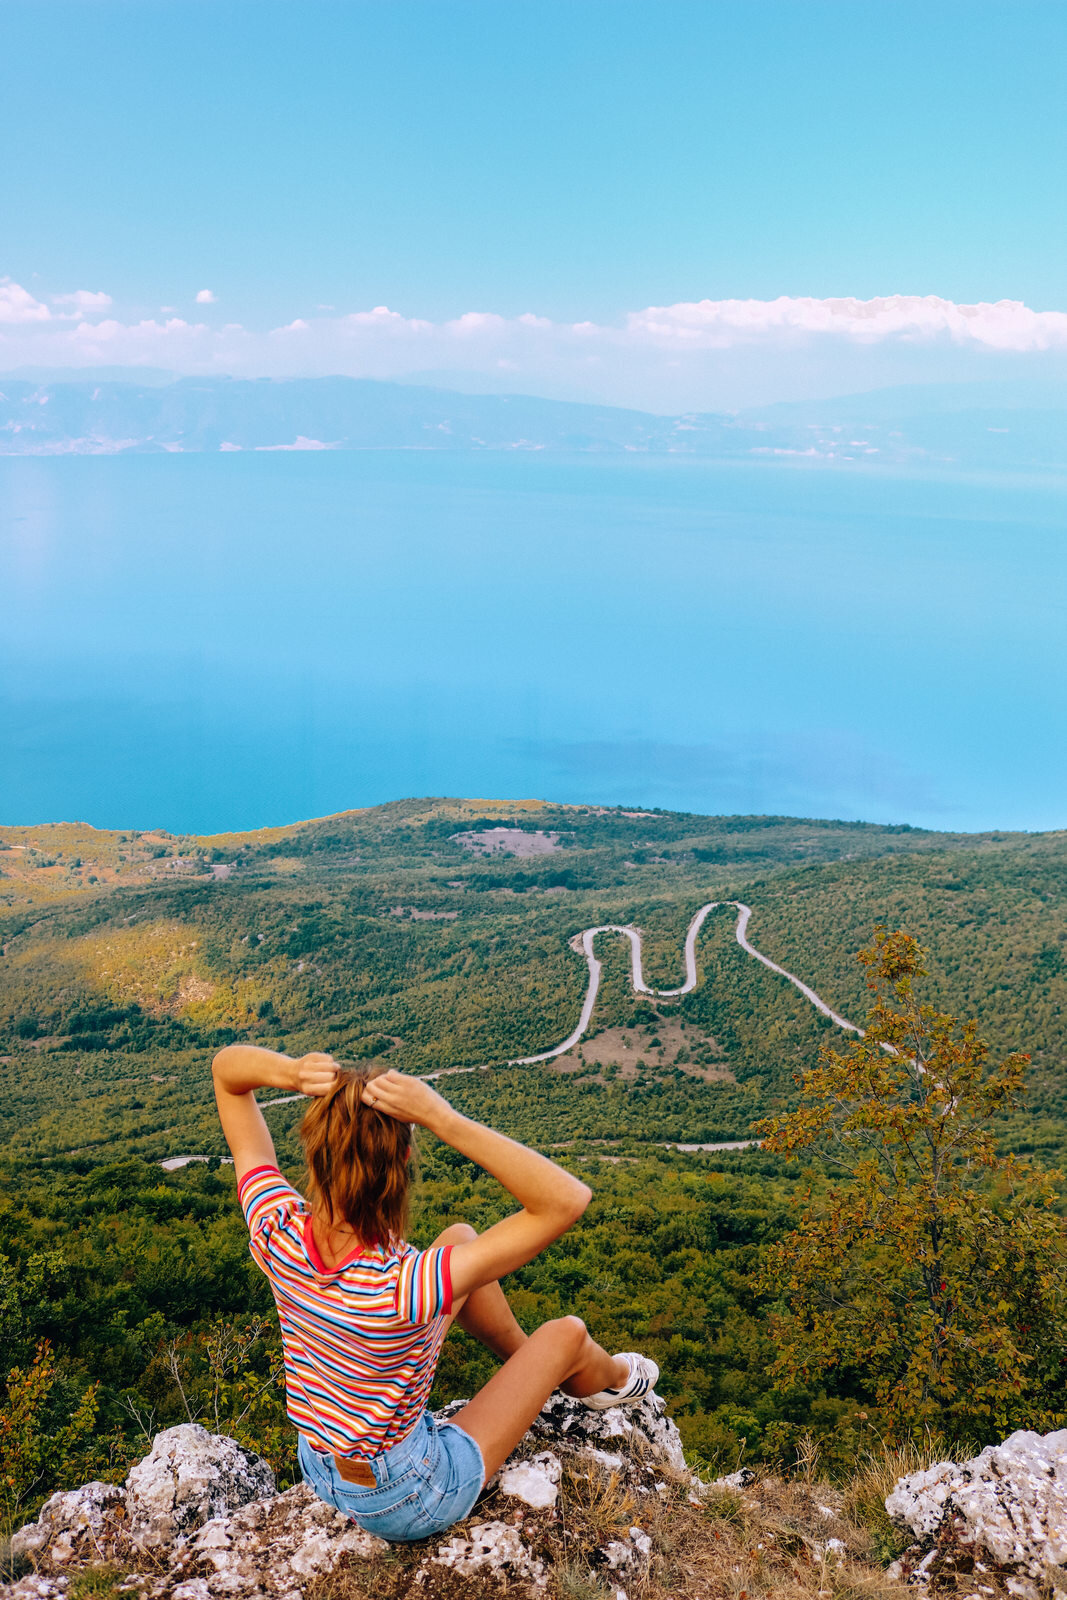 Girl in a colourful strip shirt sitting on a rocky edge looking out onto a windy road snaking through green hills